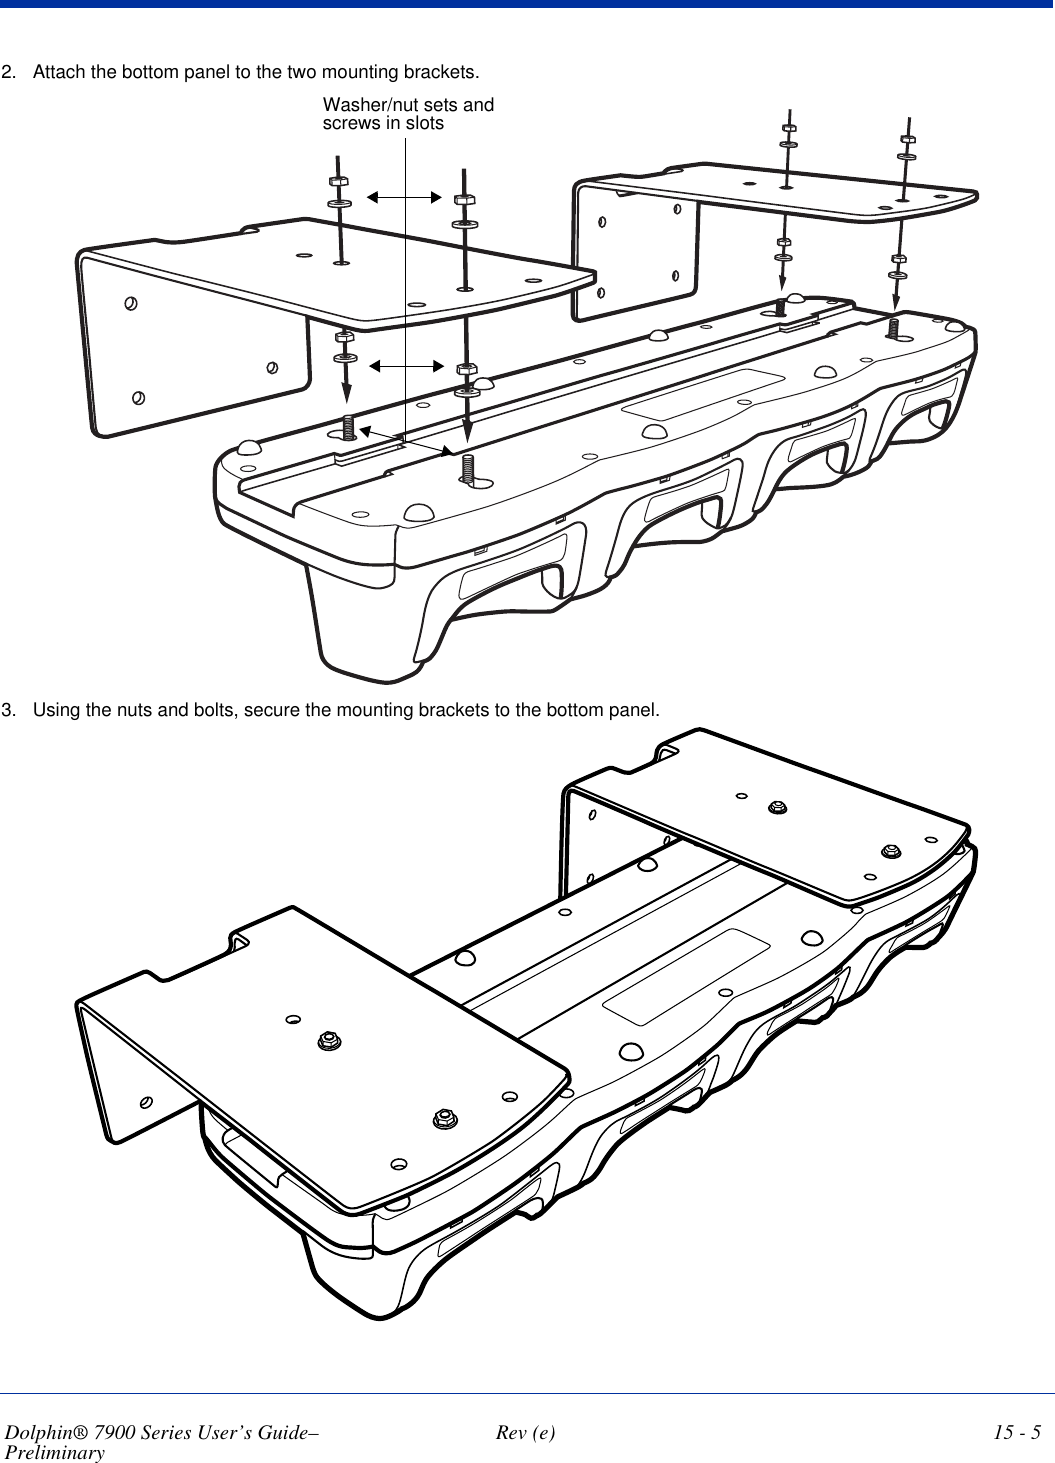 Dolphin® 7900 Series User’s Guide–Preliminary  Rev (e) 15 - 52. Attach the bottom panel to the two mounting brackets.Washer/nut sets and screws in slots3. Using the nuts and bolts, secure the mounting brackets to the bottom panel.